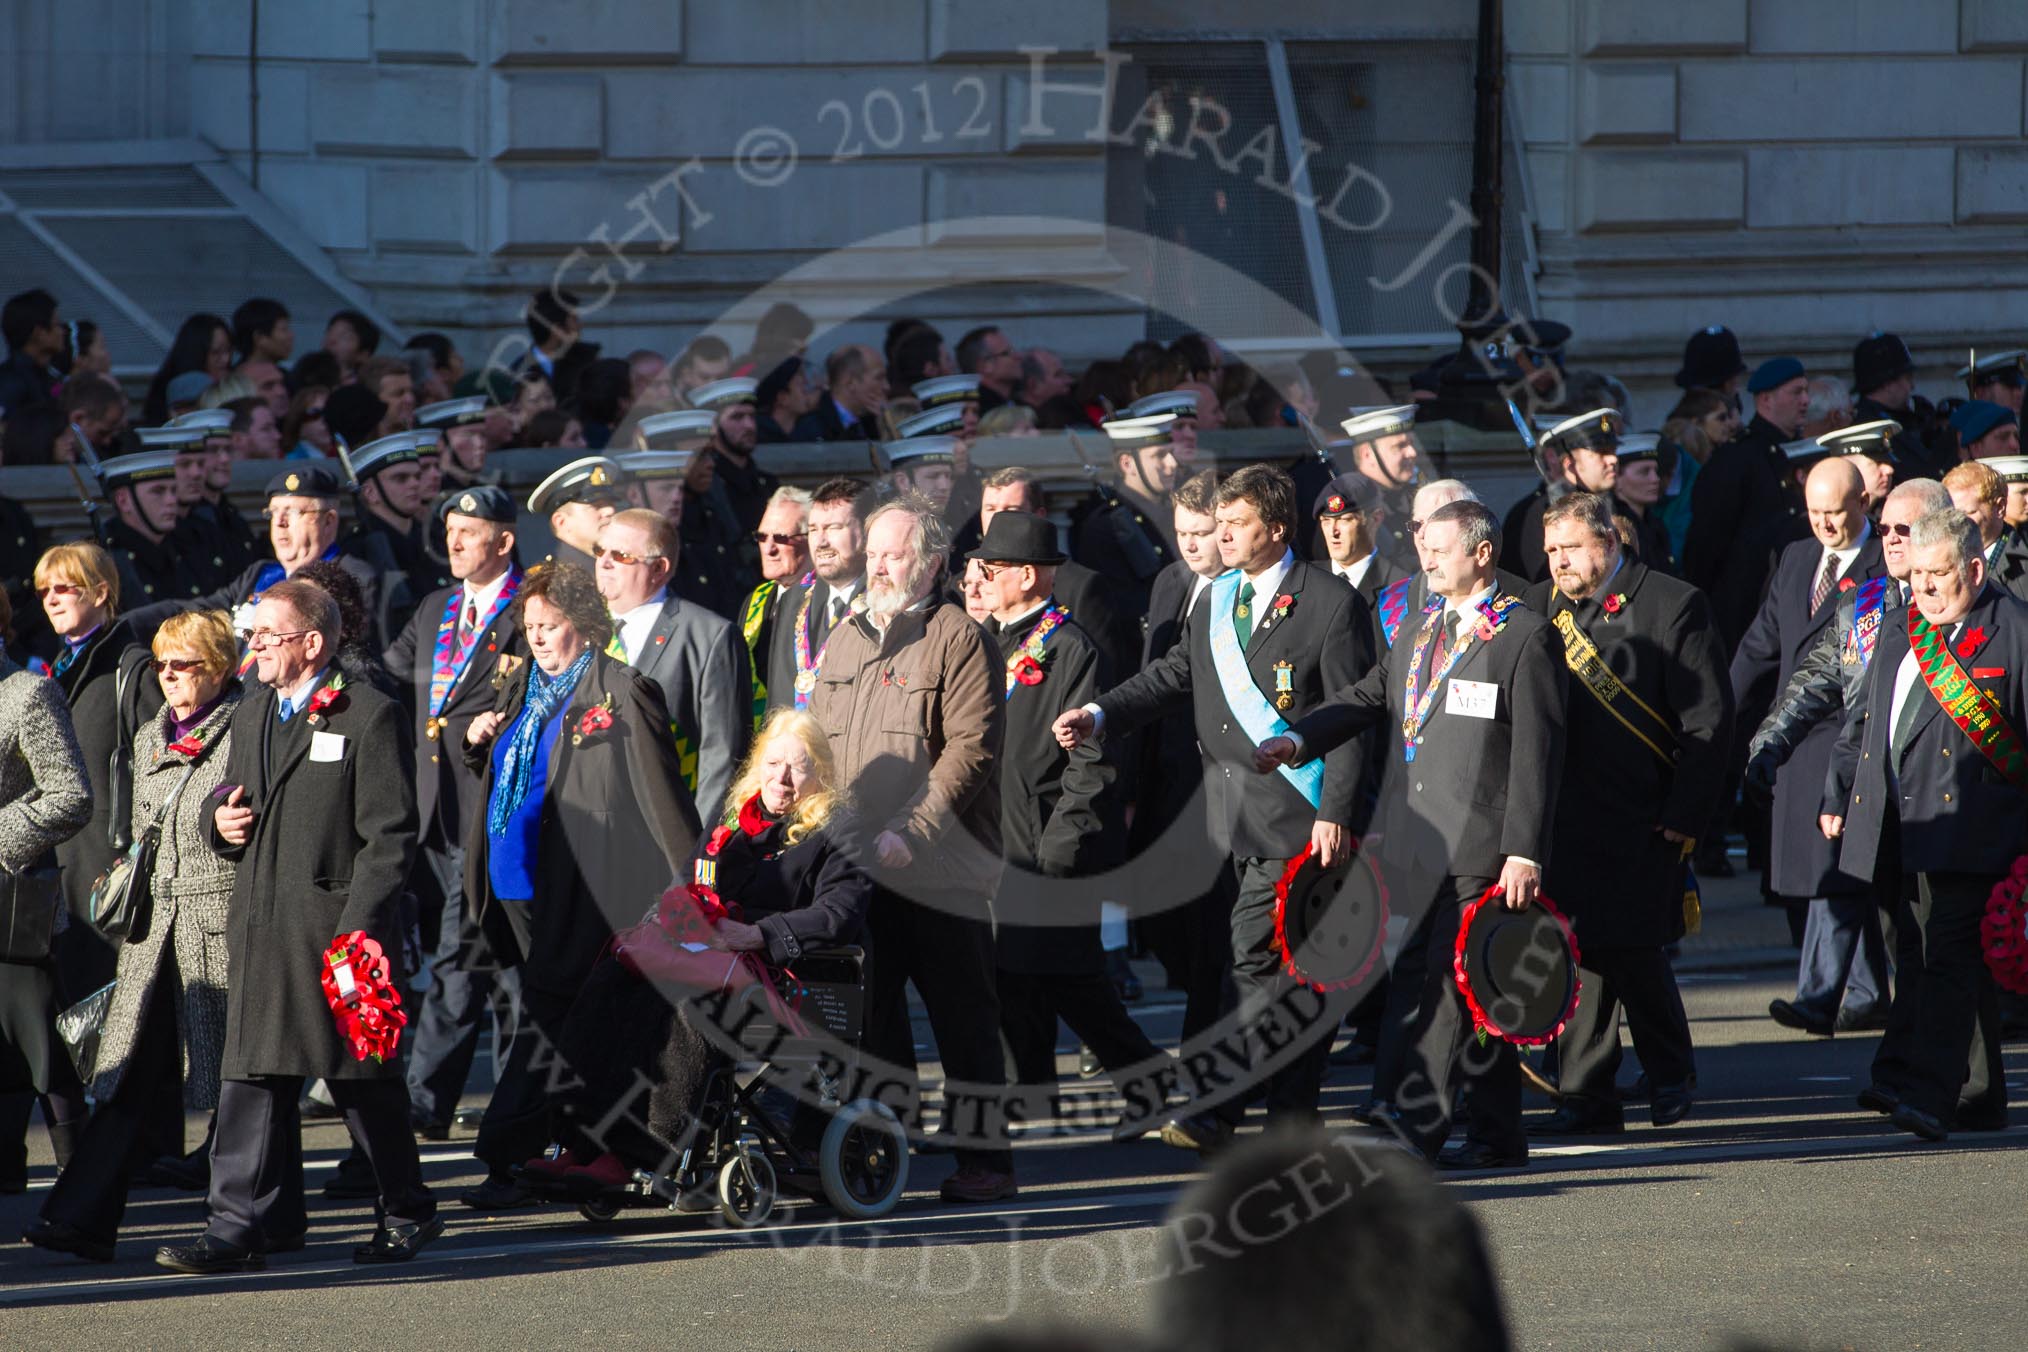 Remembrance Sunday 2012 Cenotaph March Past: Group M36 - Shot at Dawn Pardons Campaign, M37 - Royal Antediluvian Order of Buffaloes..
Whitehall, Cenotaph,
London SW1,

United Kingdom,
on 11 November 2012 at 12:13, image #1641